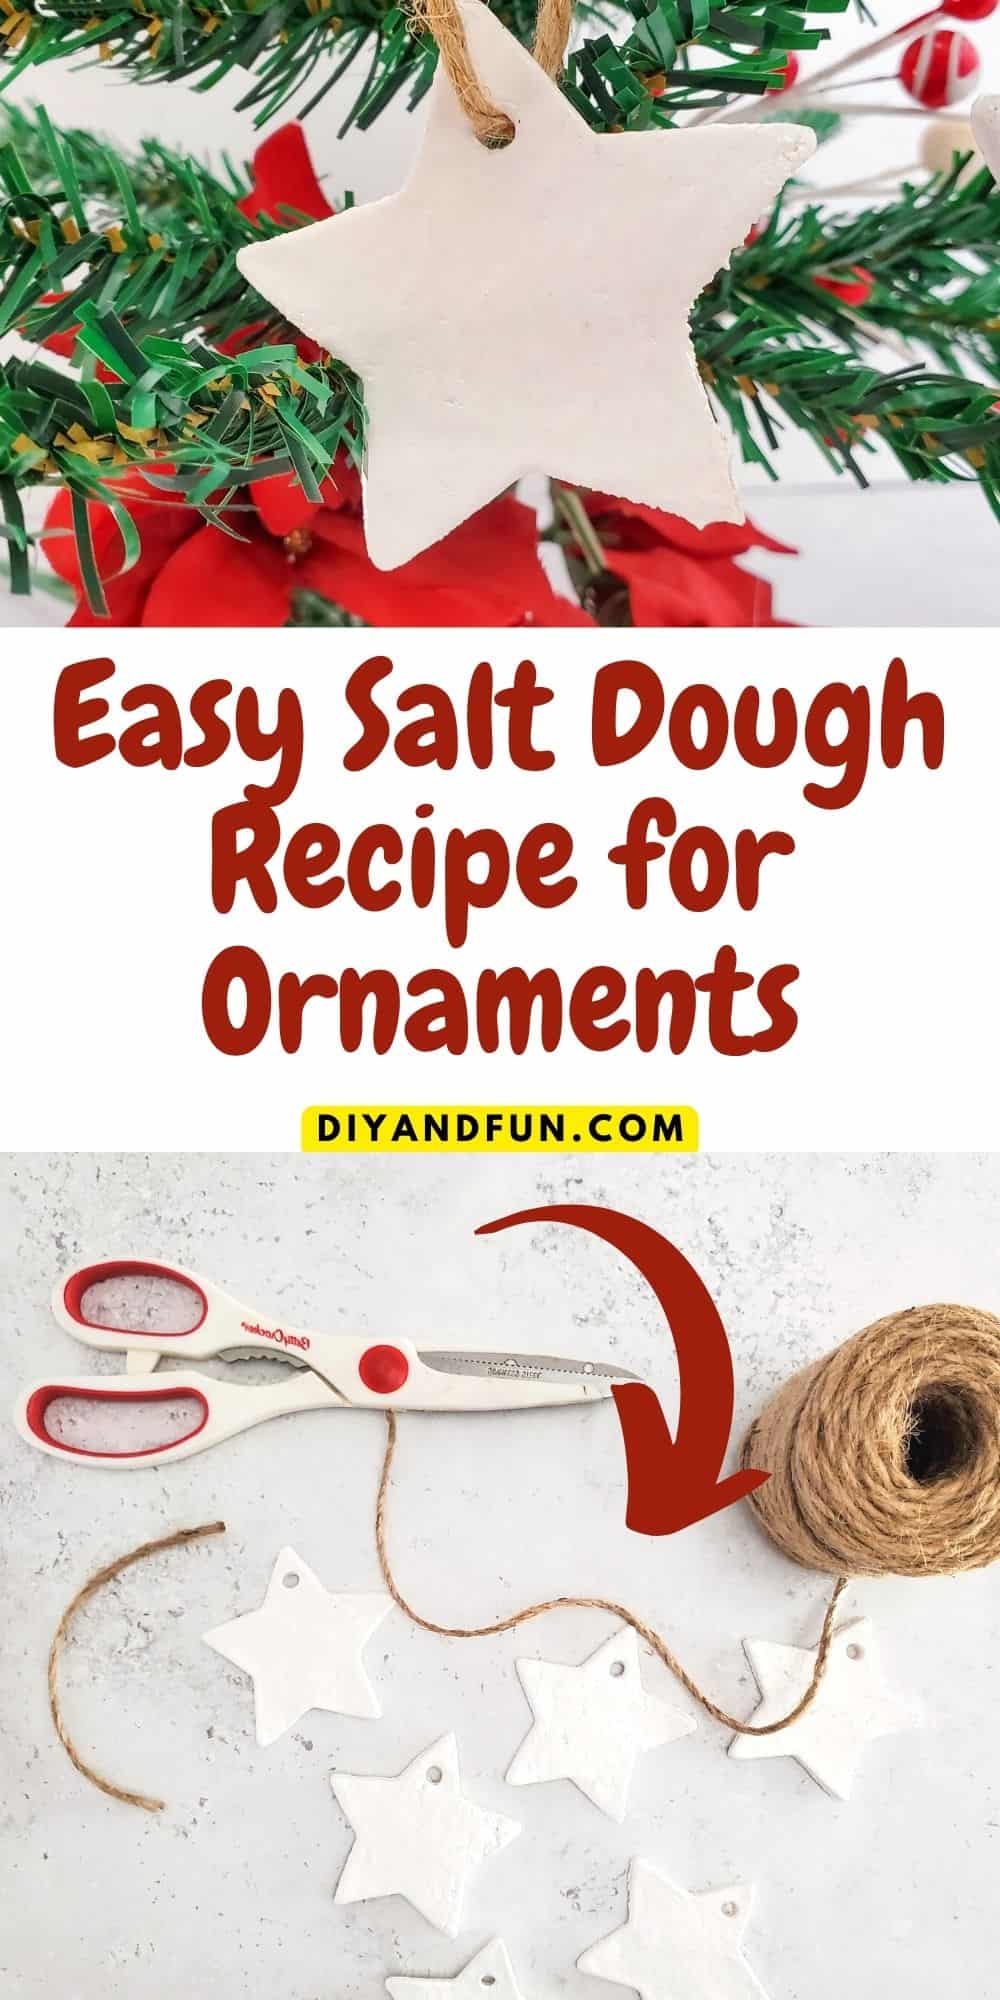 Easy Salt Dough Recipe for Ornaments, a simple three ingredient do it yourself Christmas craft idea. Suitable for Most Ages.